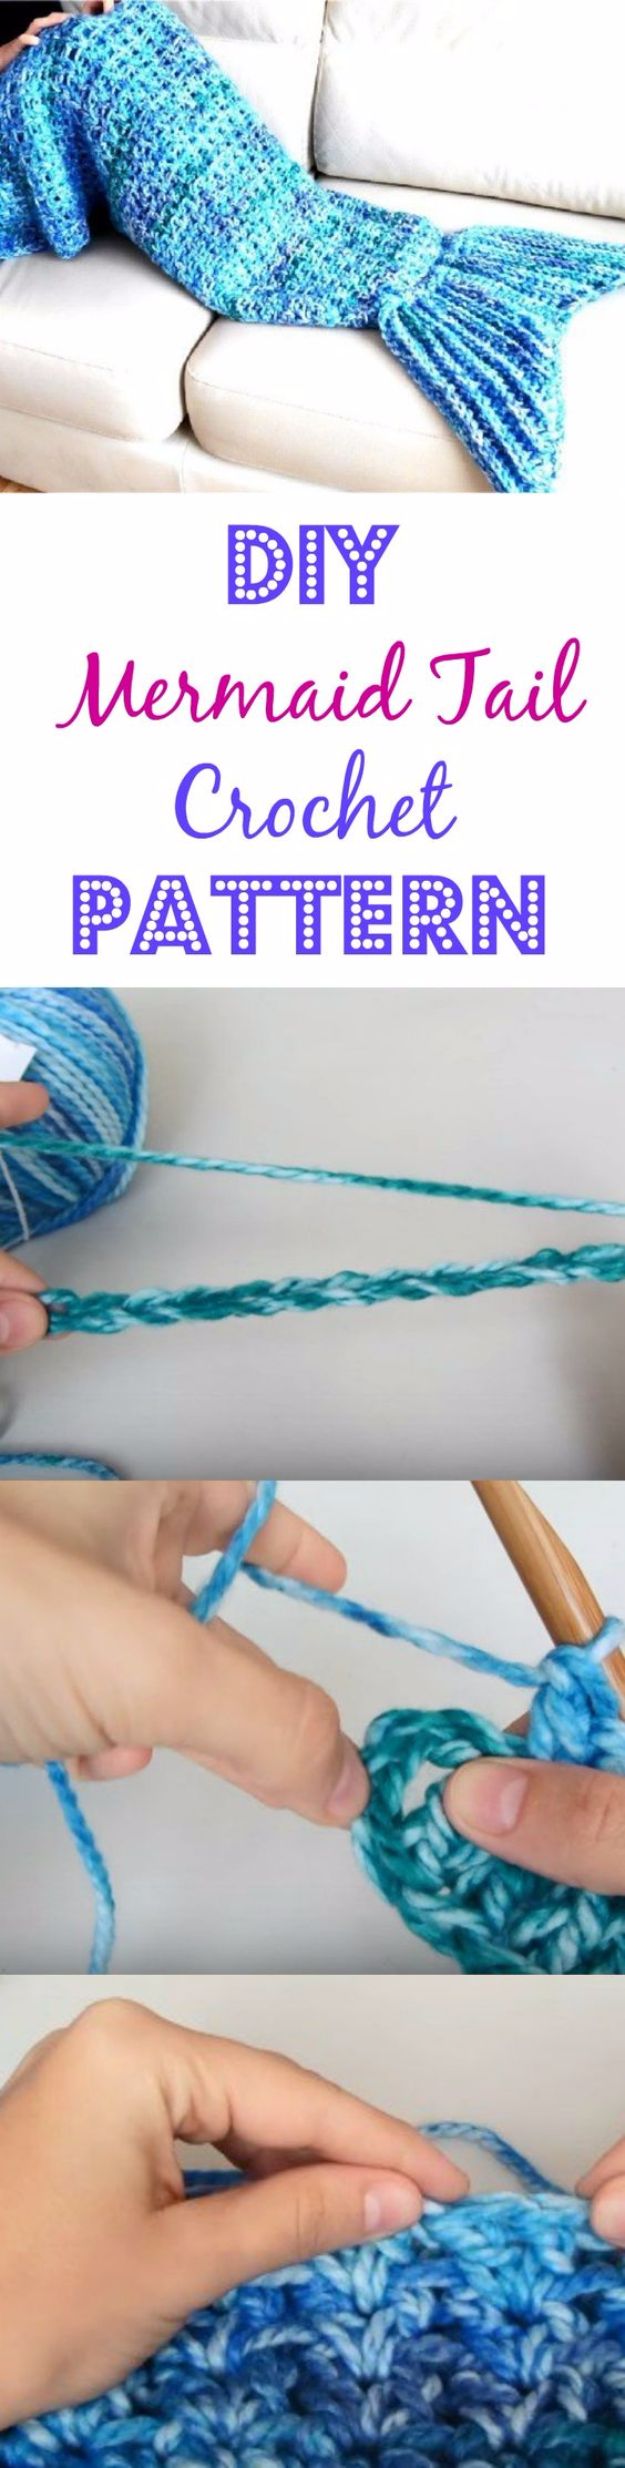 DIY Mermaid Crafts - Easy DIY Mermaid Tail Crochet Pattern - How To Make Room Decorations, Art Projects, Jewelry, and Makeup For Kids, Teens and Teenagers - Mermaid Costume Tutorials - Fun Clothes, Pillow Projects, Mermaid Tail Tutorial